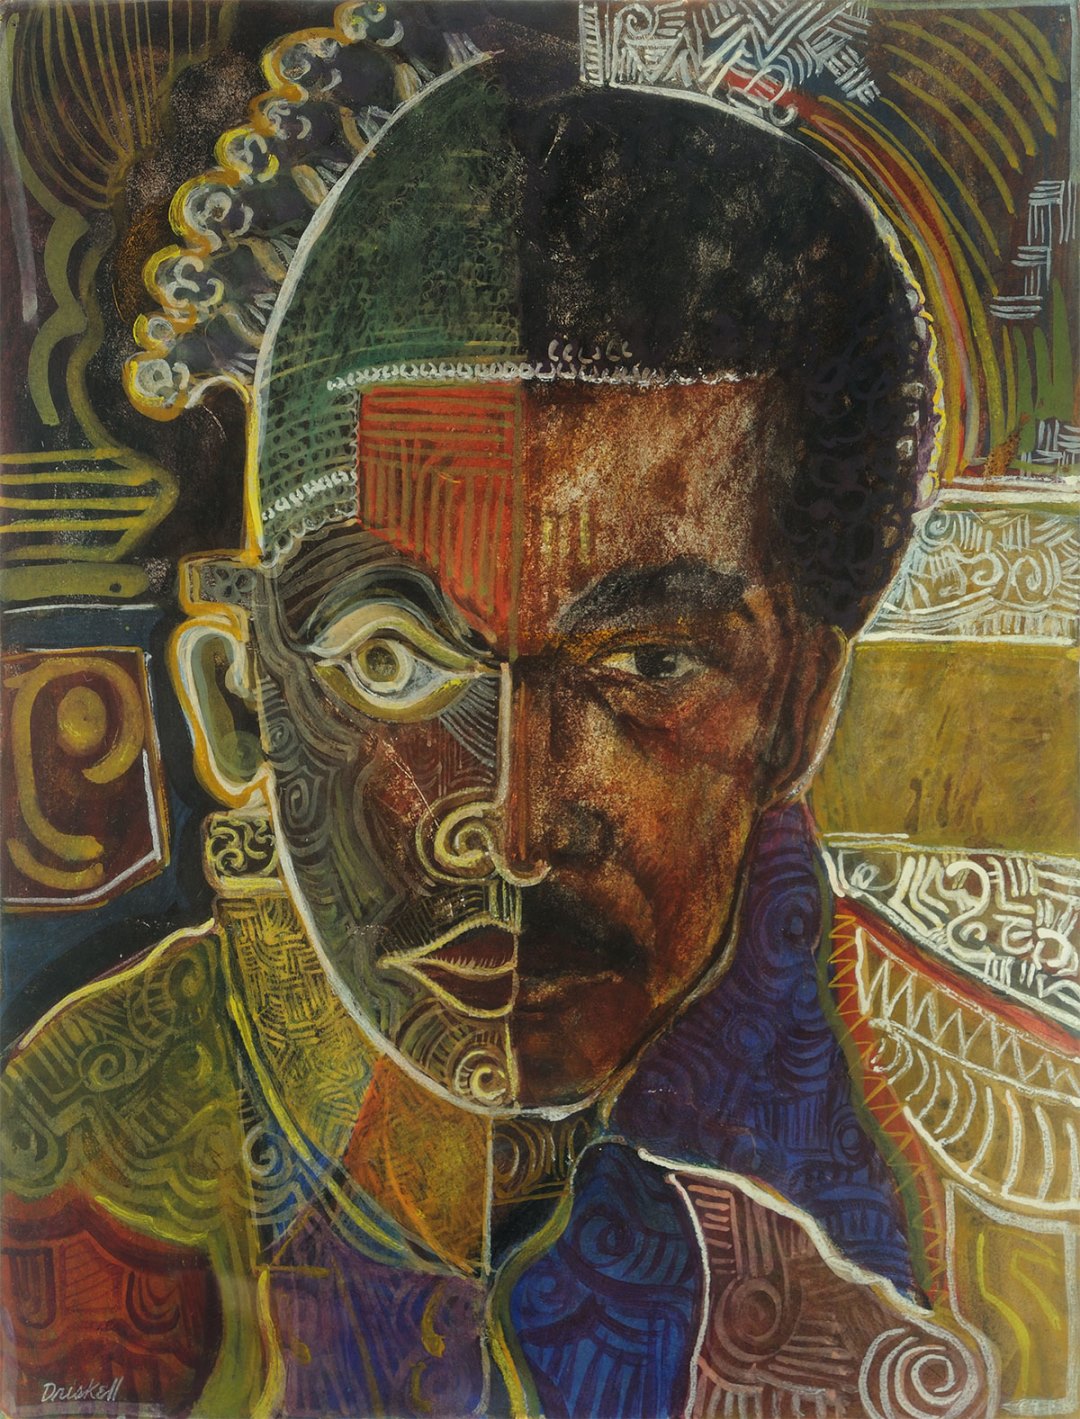 “Icons of Nature and History,” a Tribute Exhibit to David Driskell